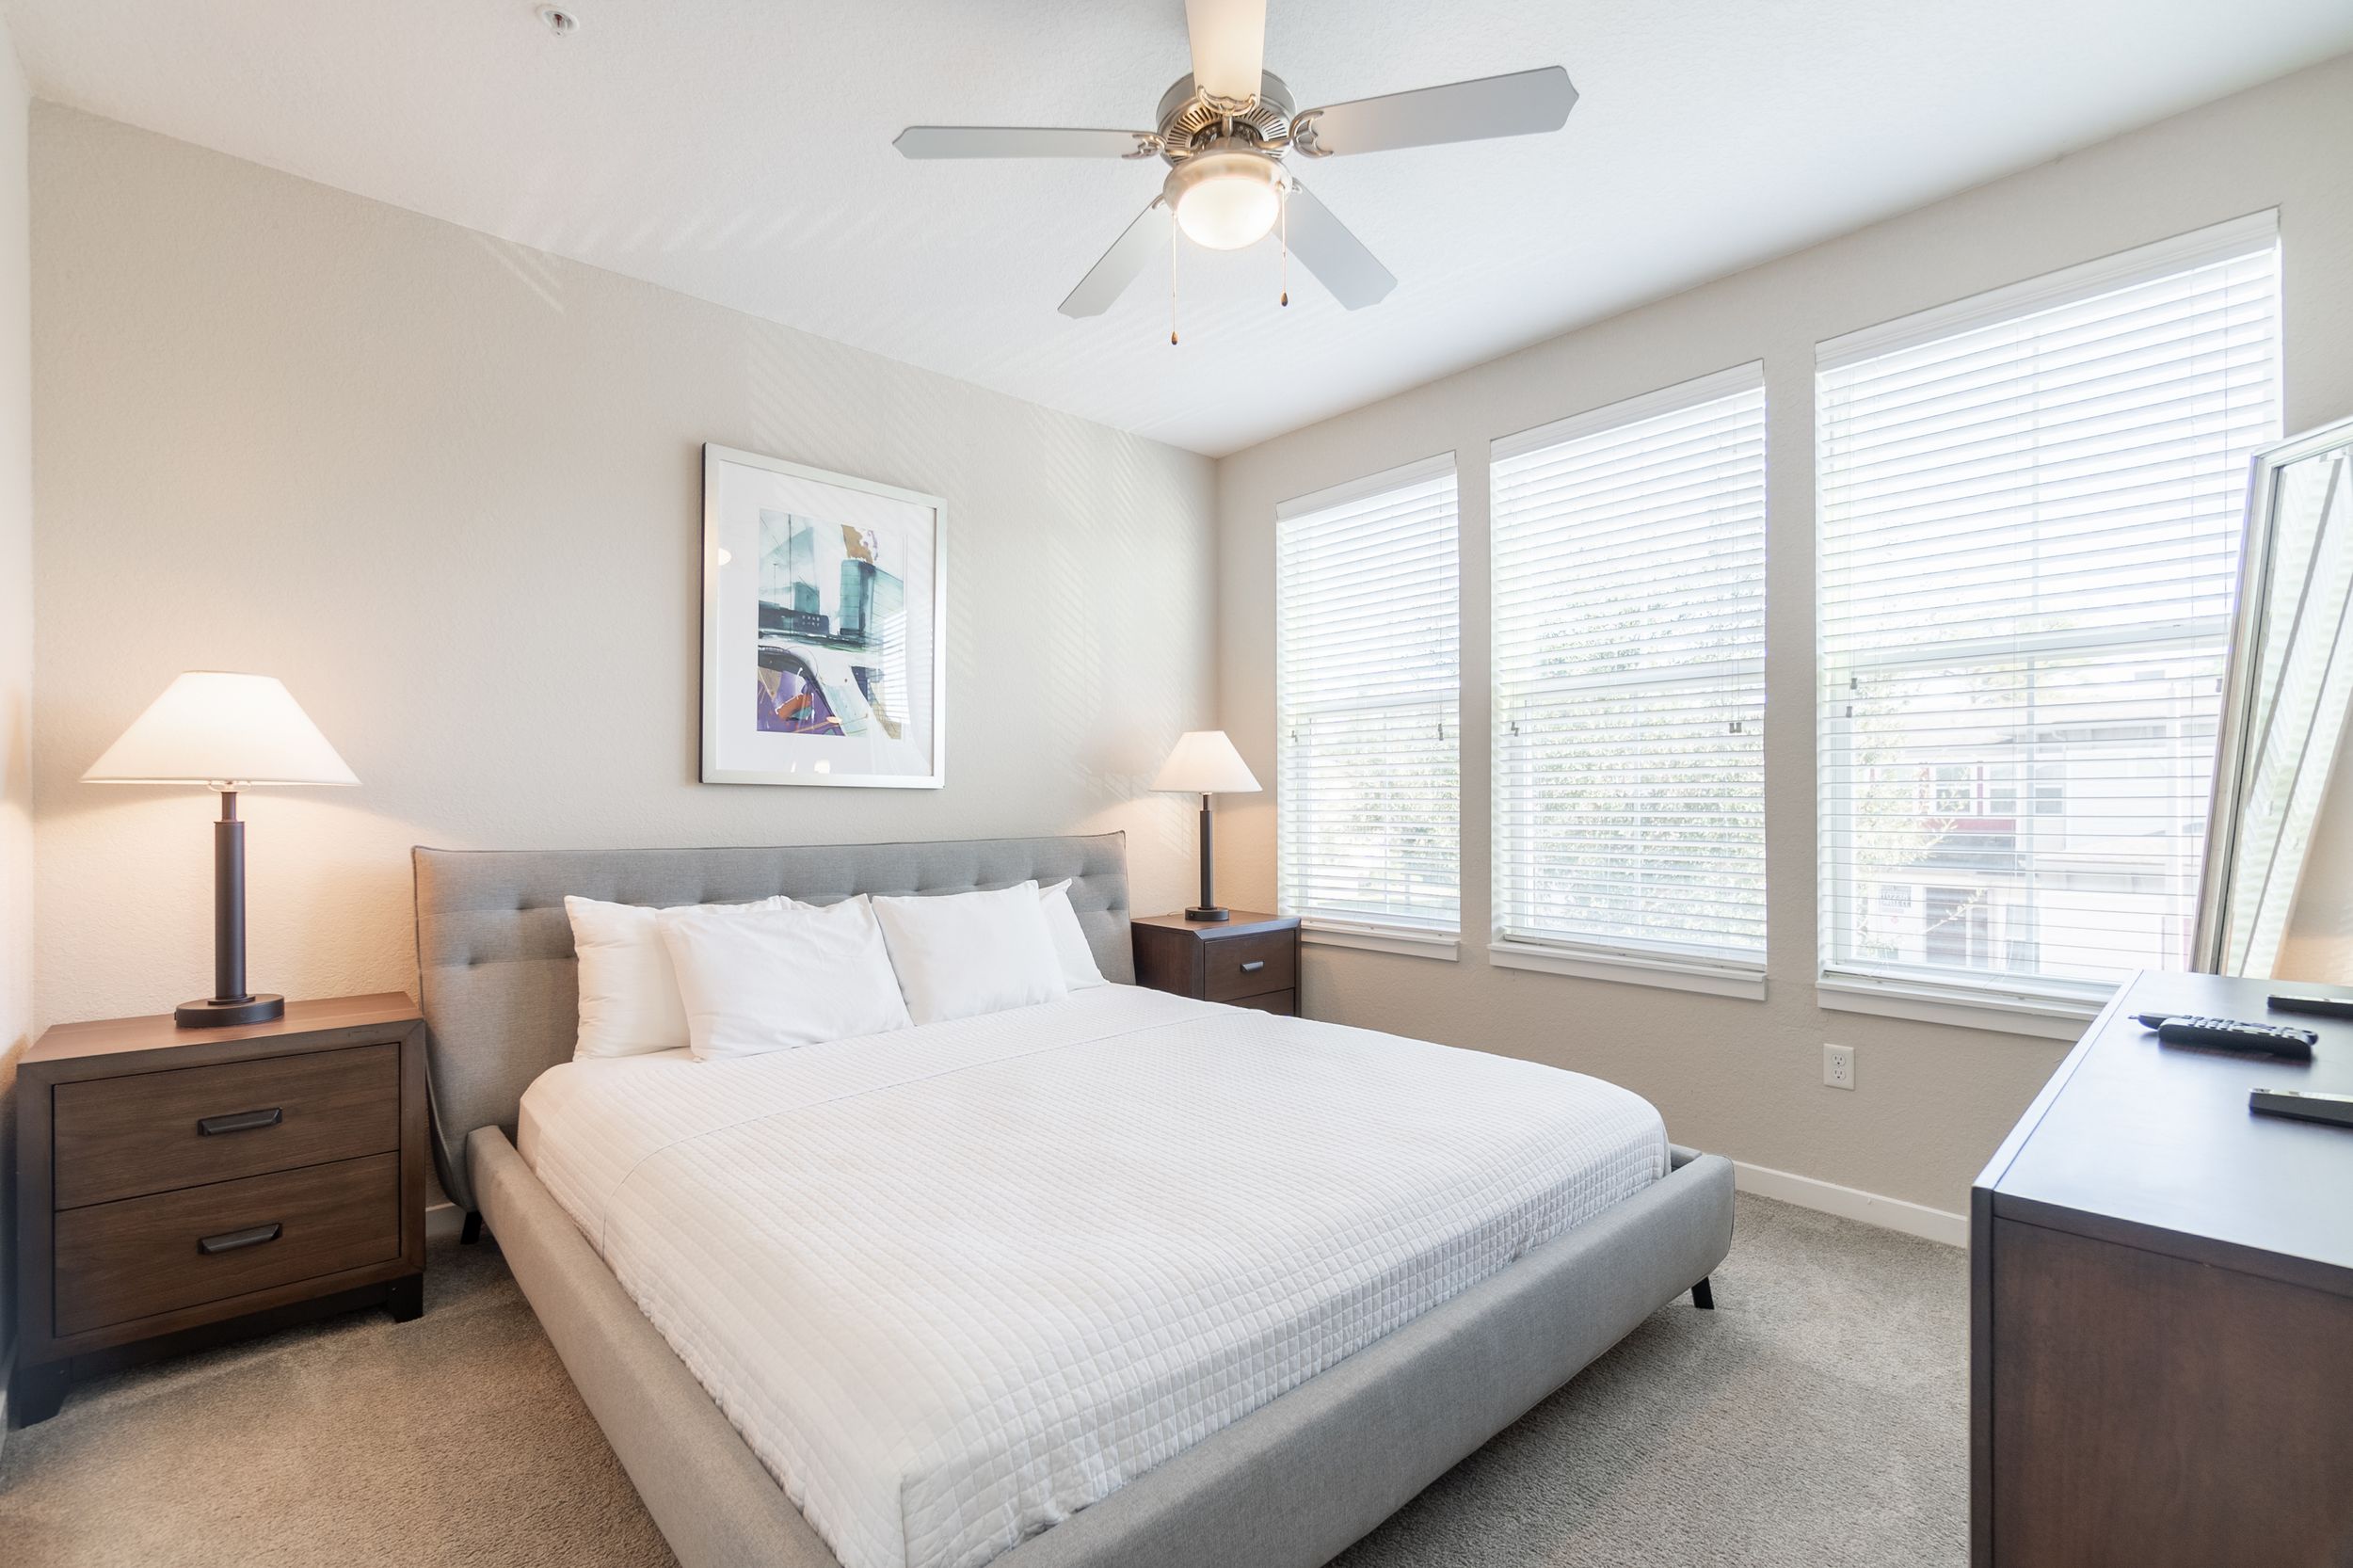 Furnished bedroom with carpet and ceiling fan